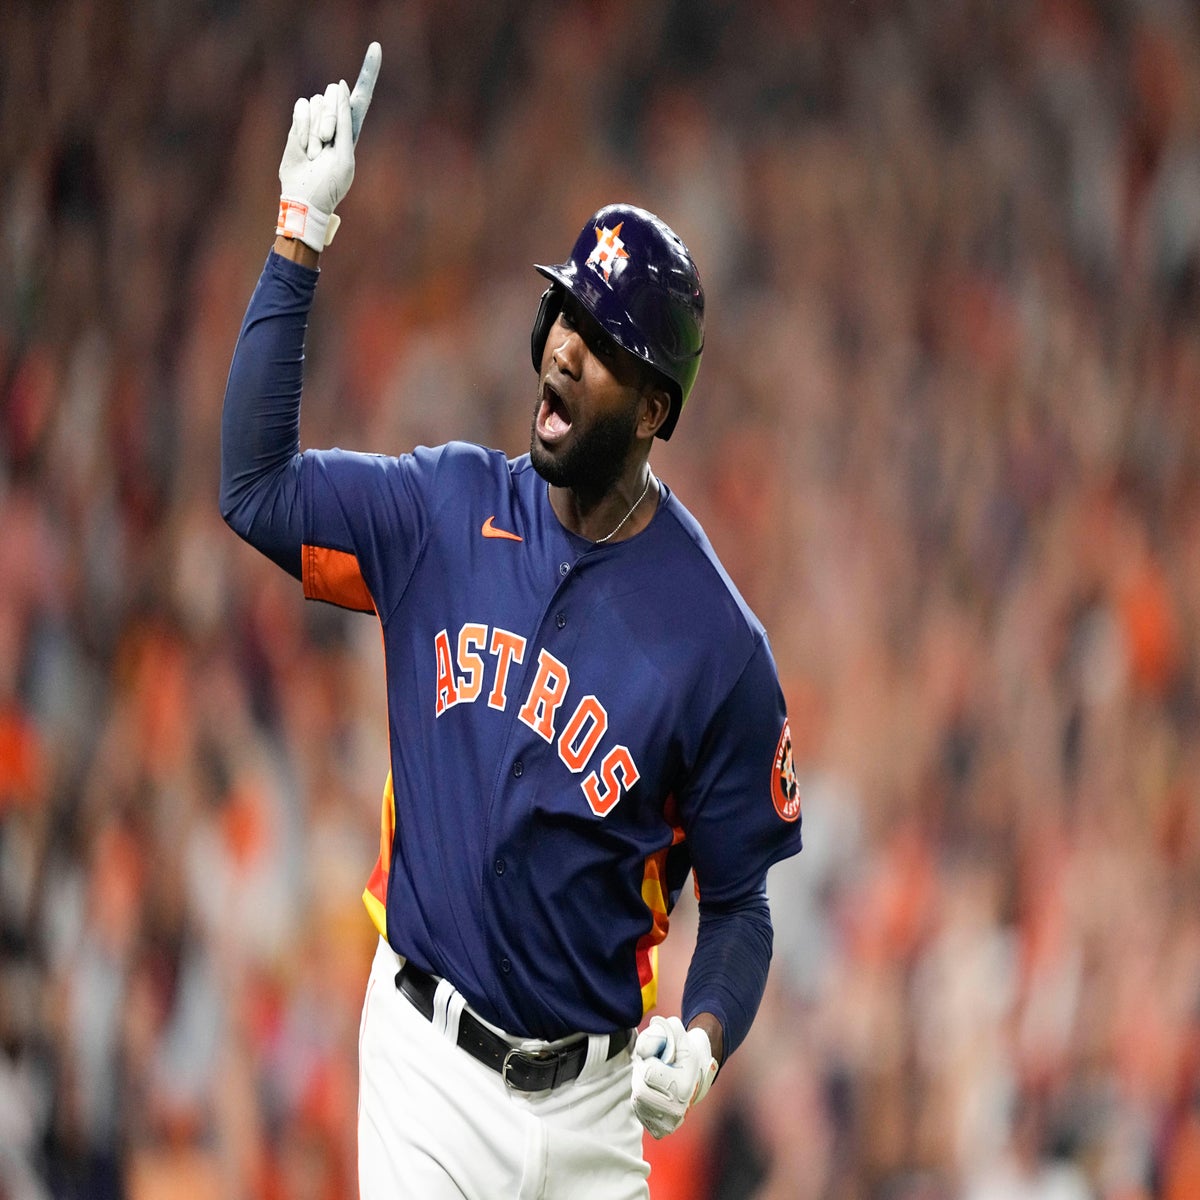 World Series Baseball 2022: Why the Astros don't need to be liked to win